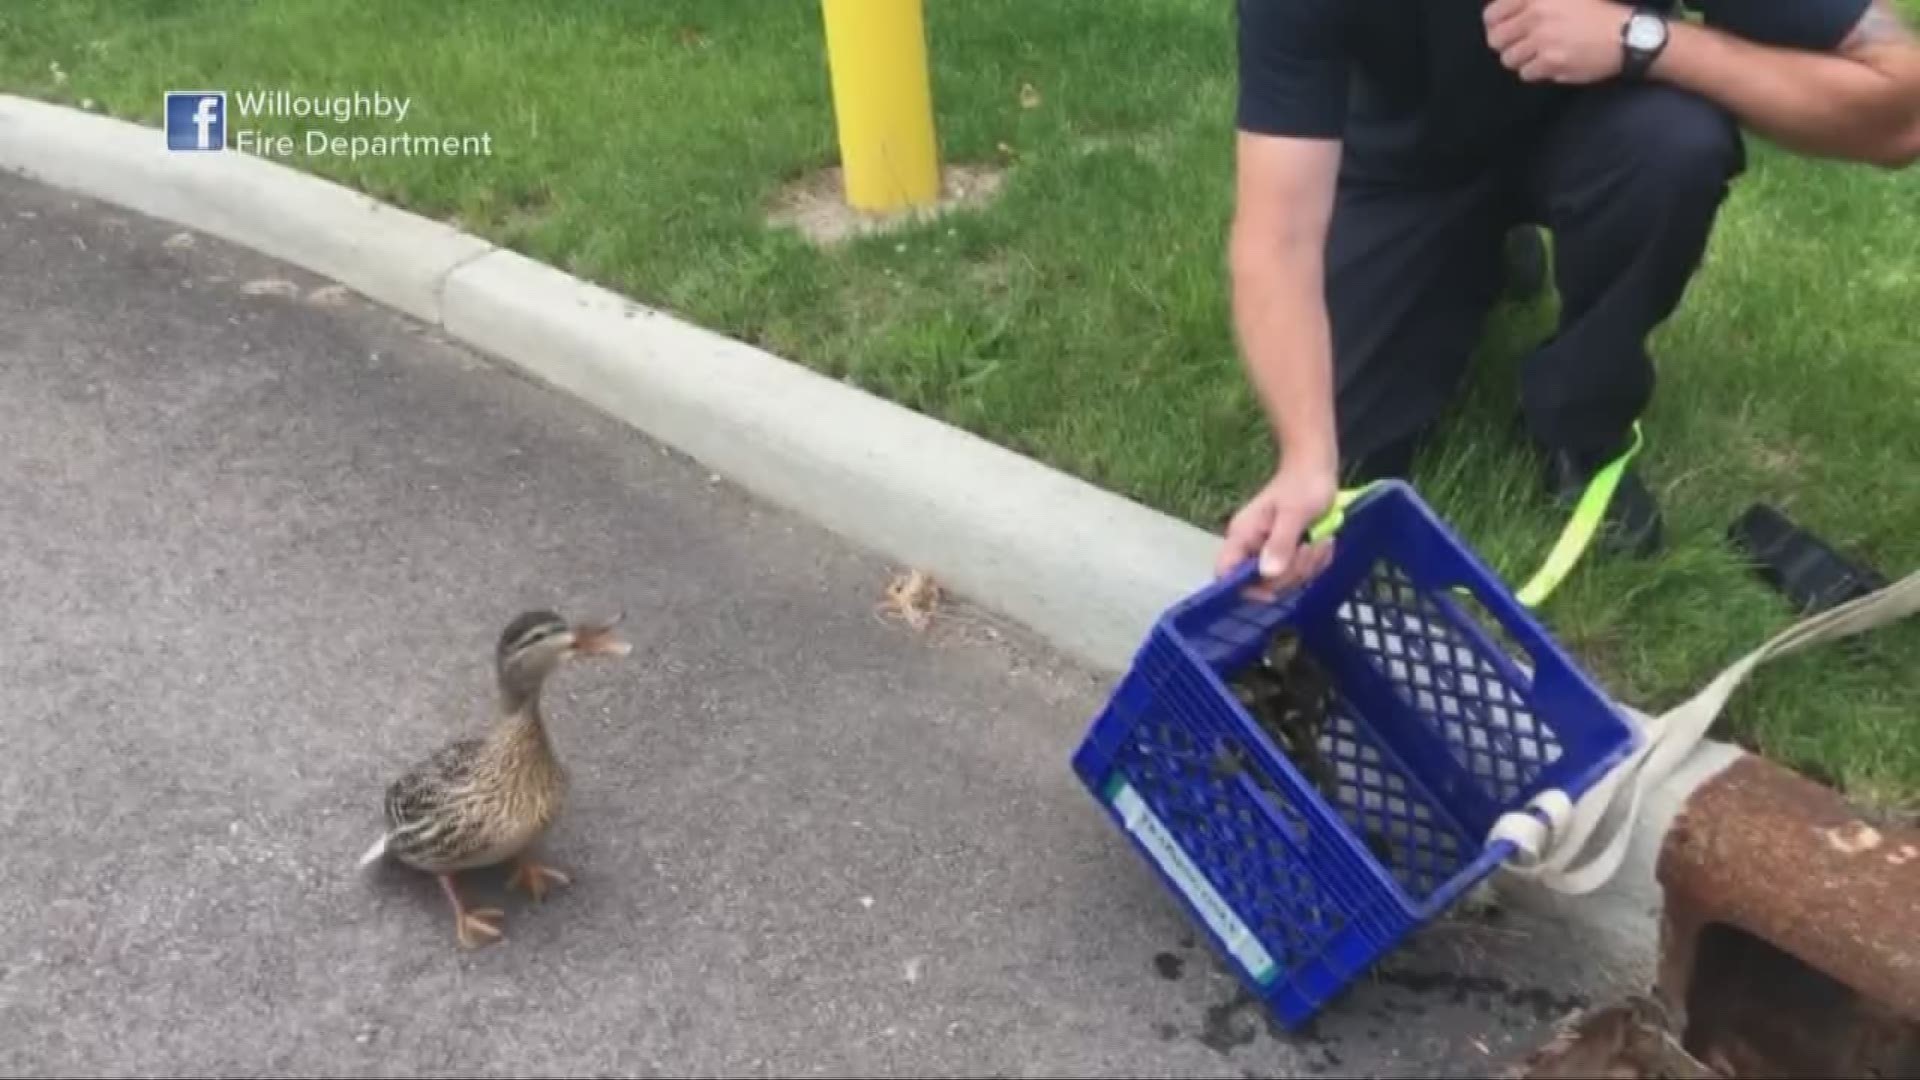 Willoughby firefighters rescue ducklings